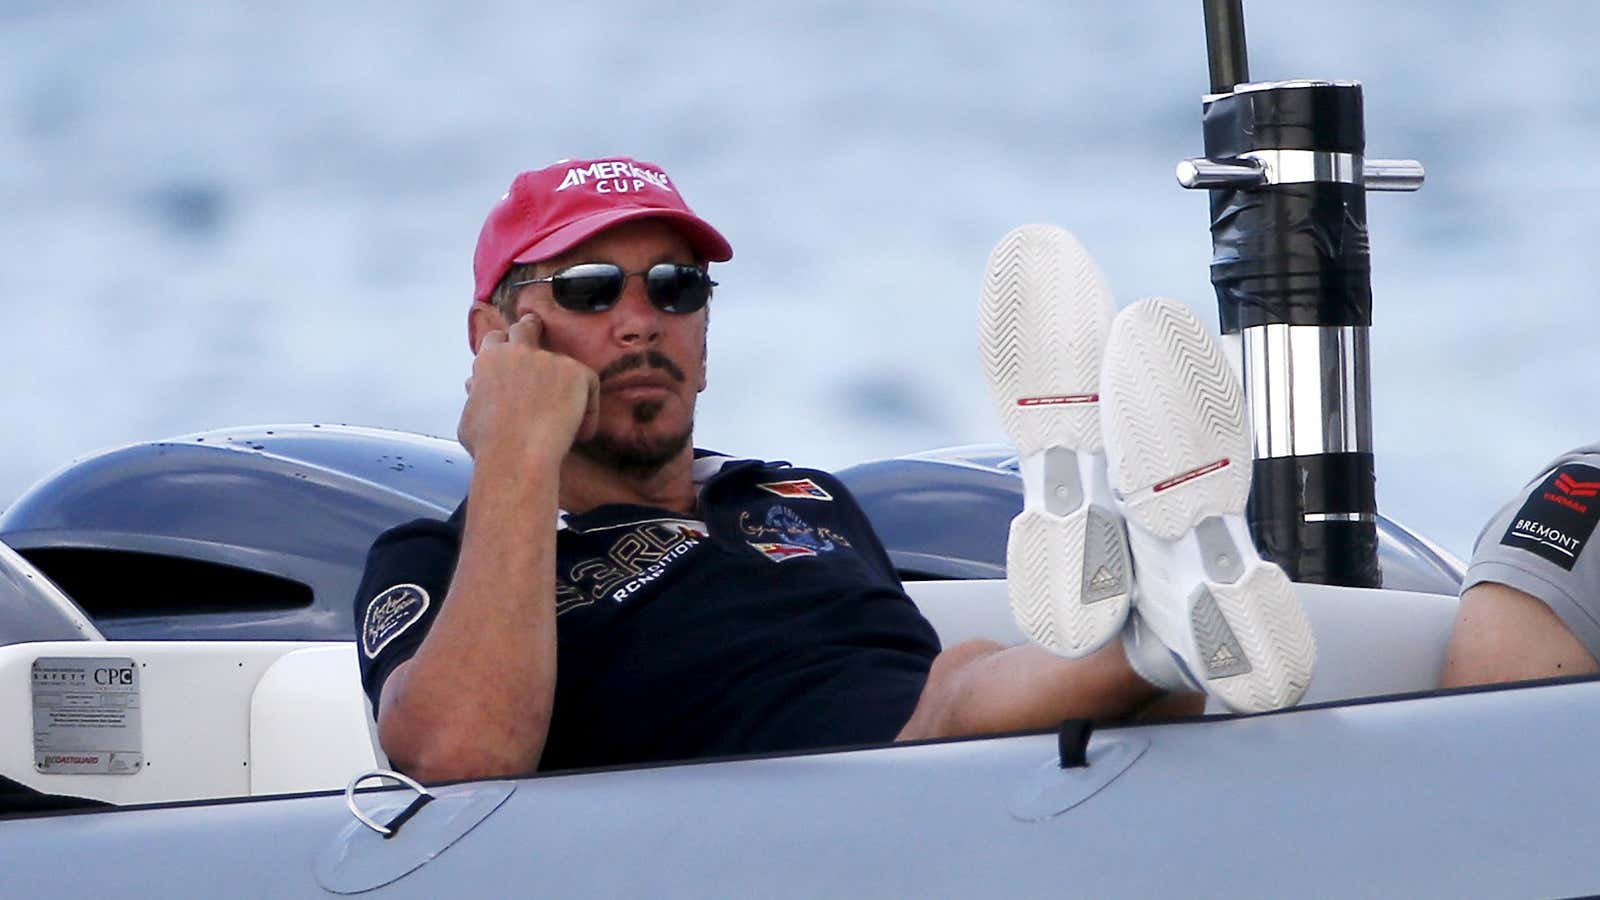 Larry Ellison, founder and former CEO of Oracle Inc., on a motor boat.